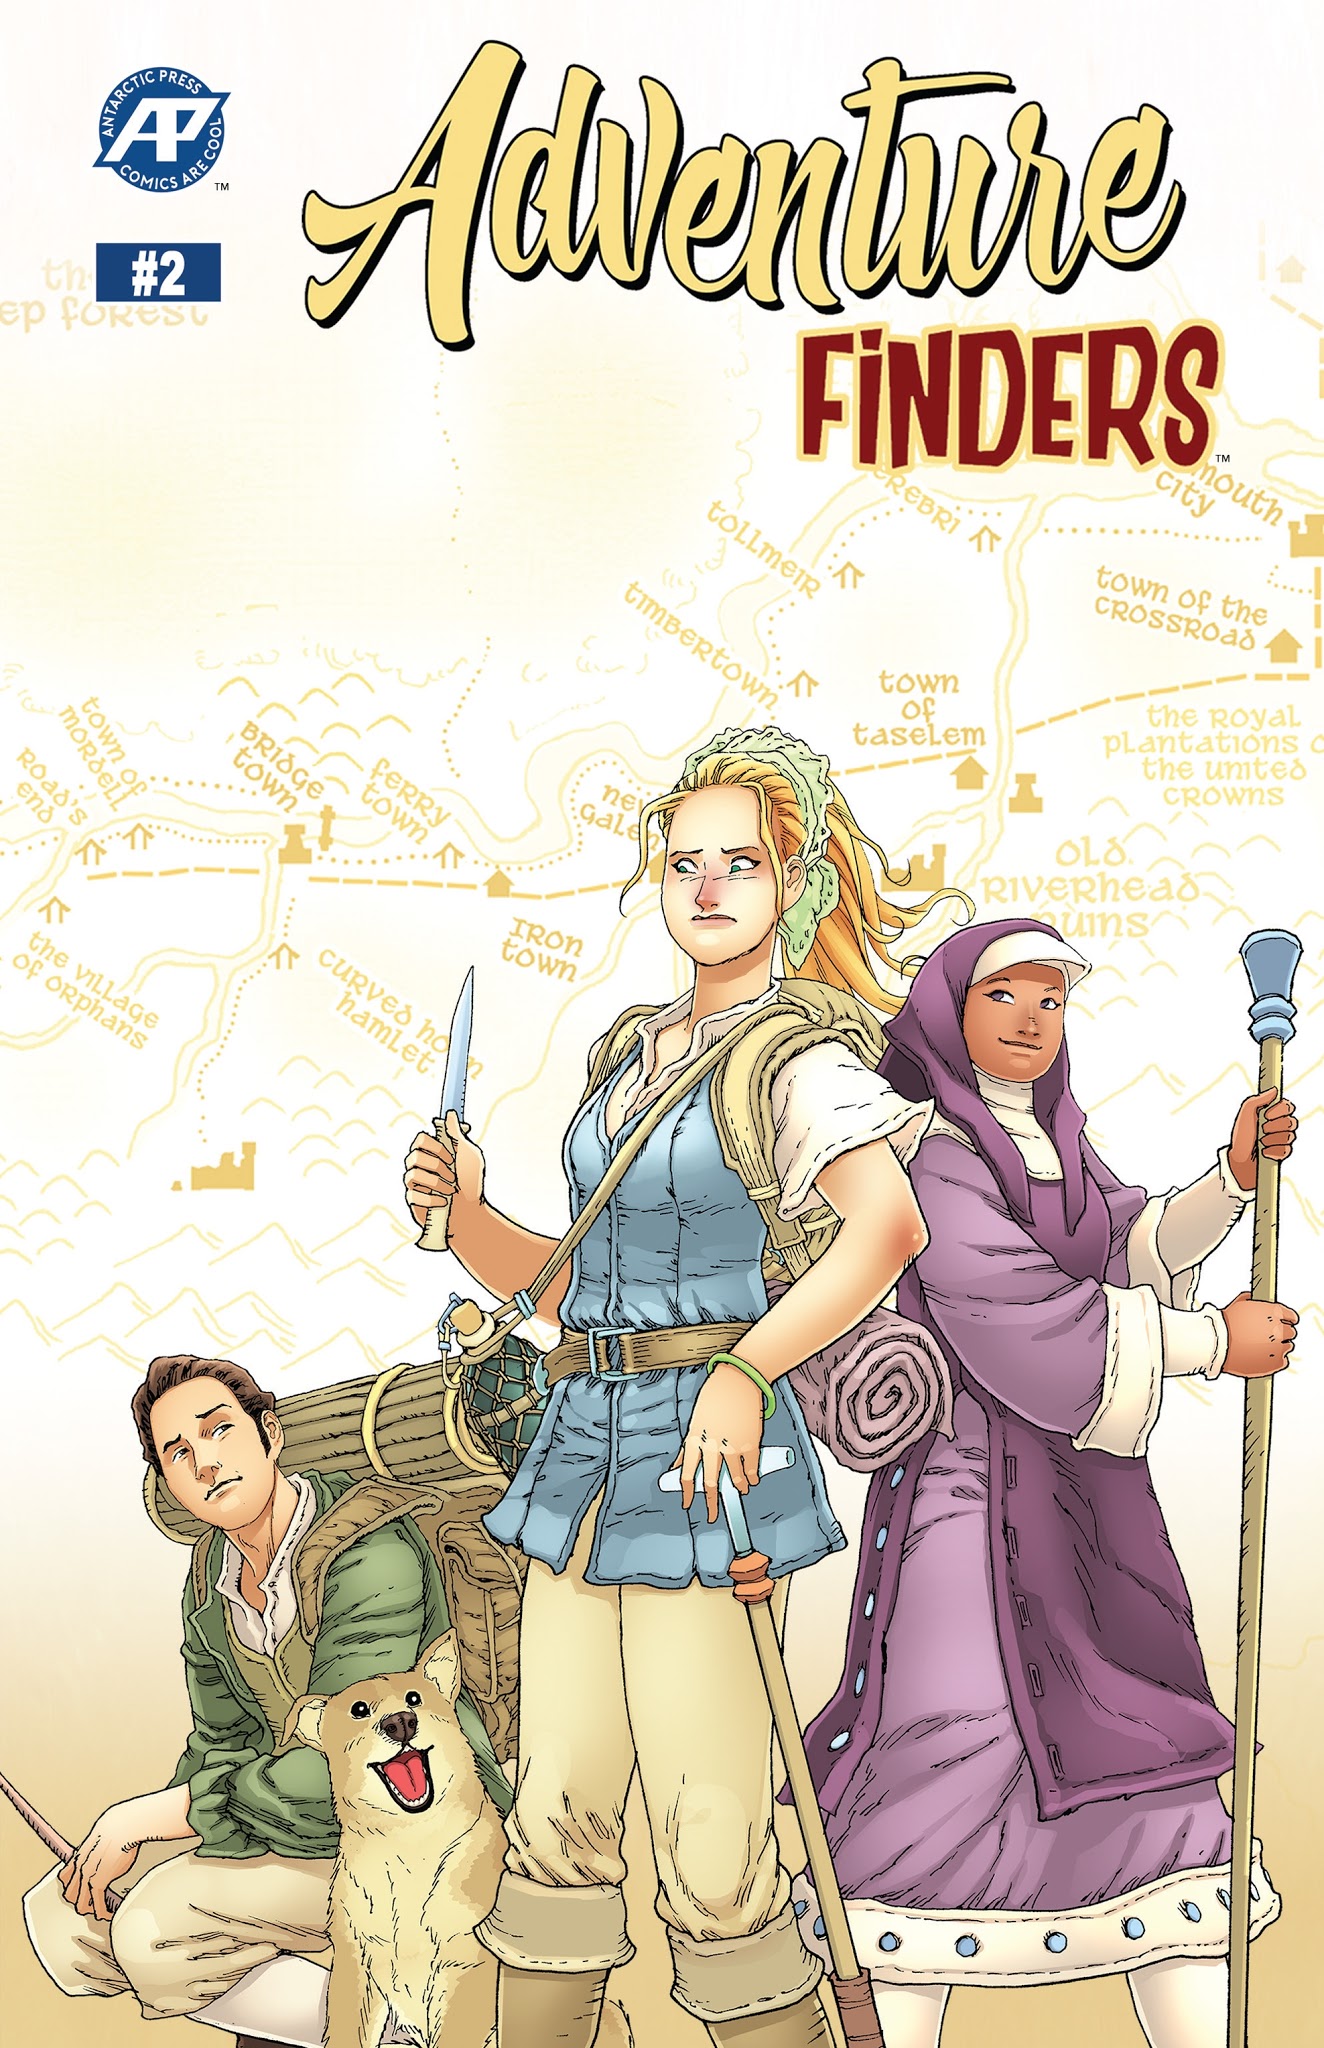 Read online Adventure Finders comic -  Issue #2 - 1